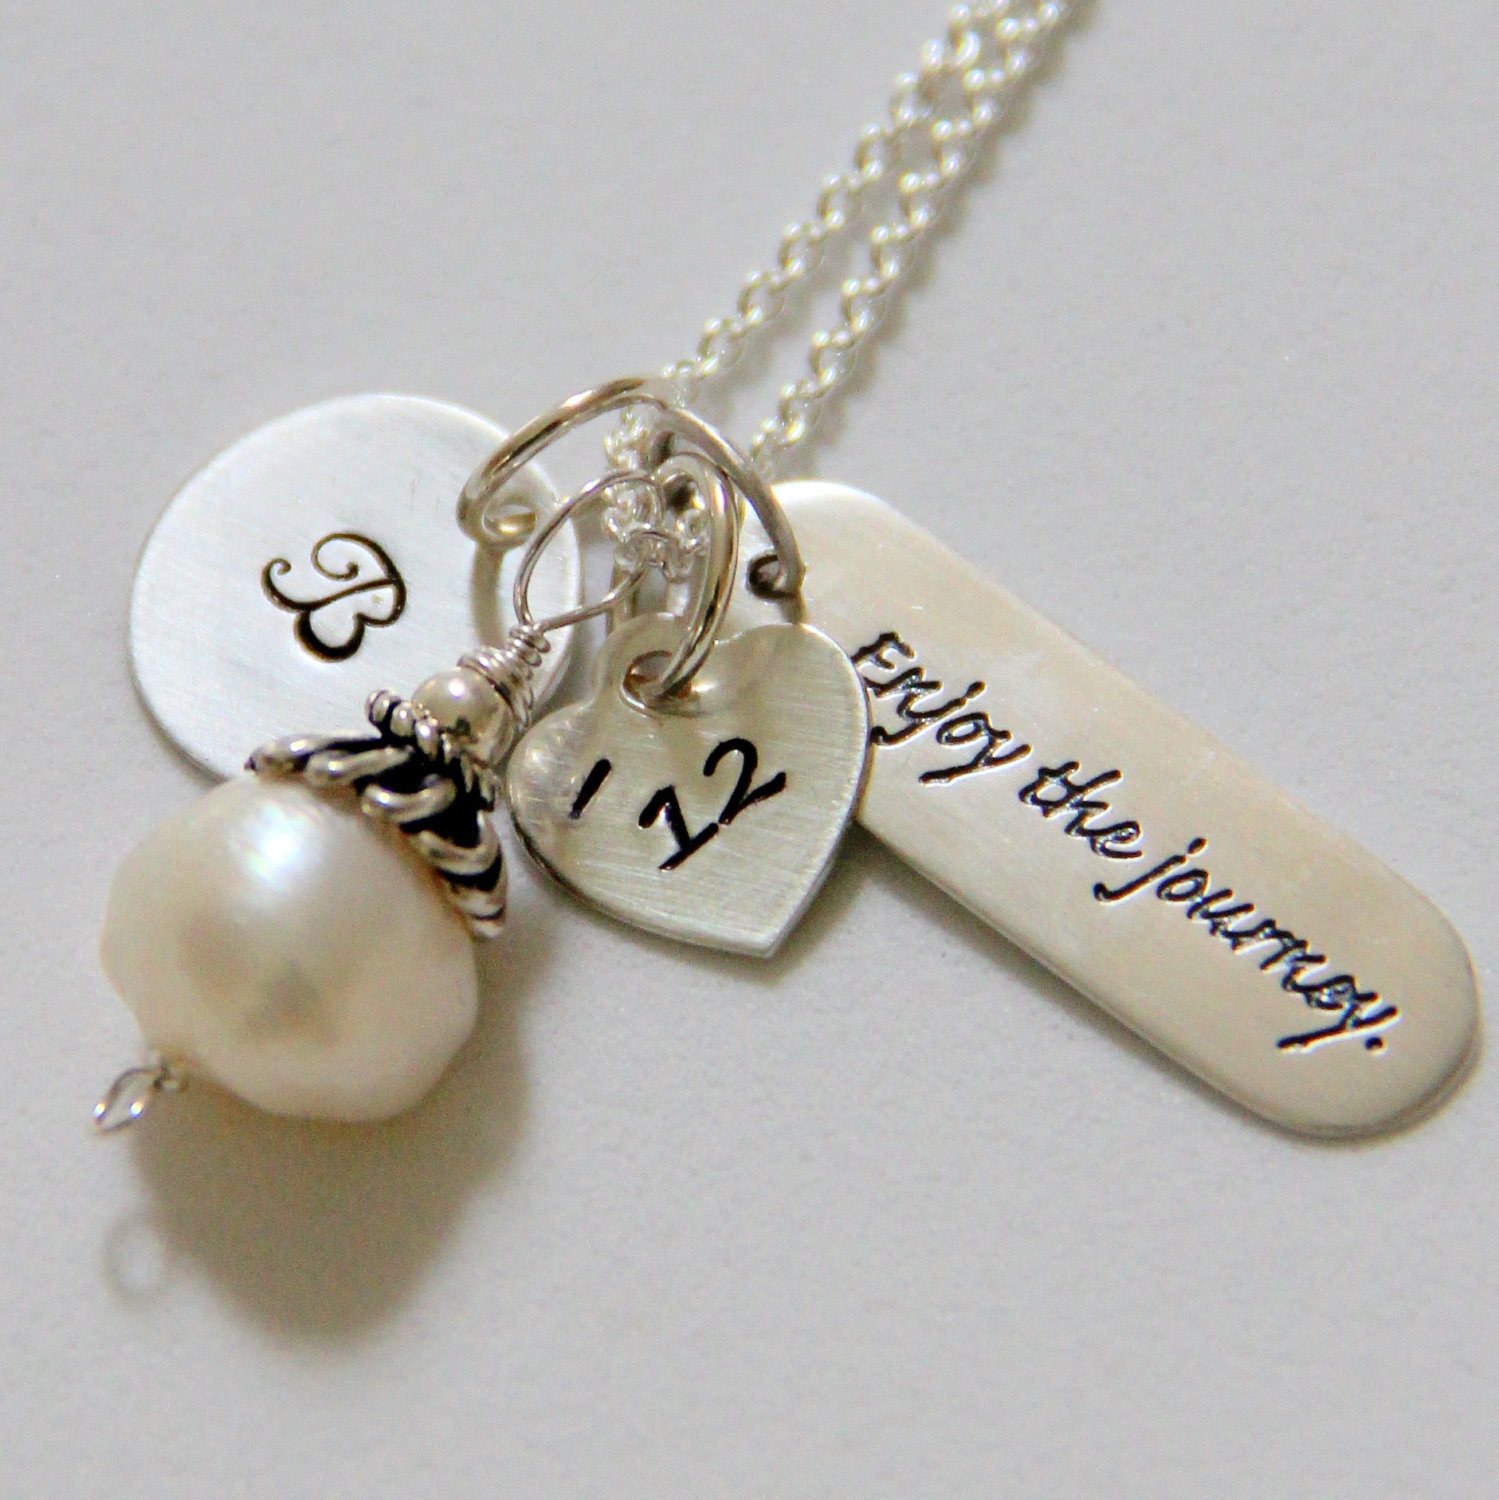 Graduation Jewelry Gift Ideas For Her
 College Graduation Necklace Graduation Gift 2015 Poetry